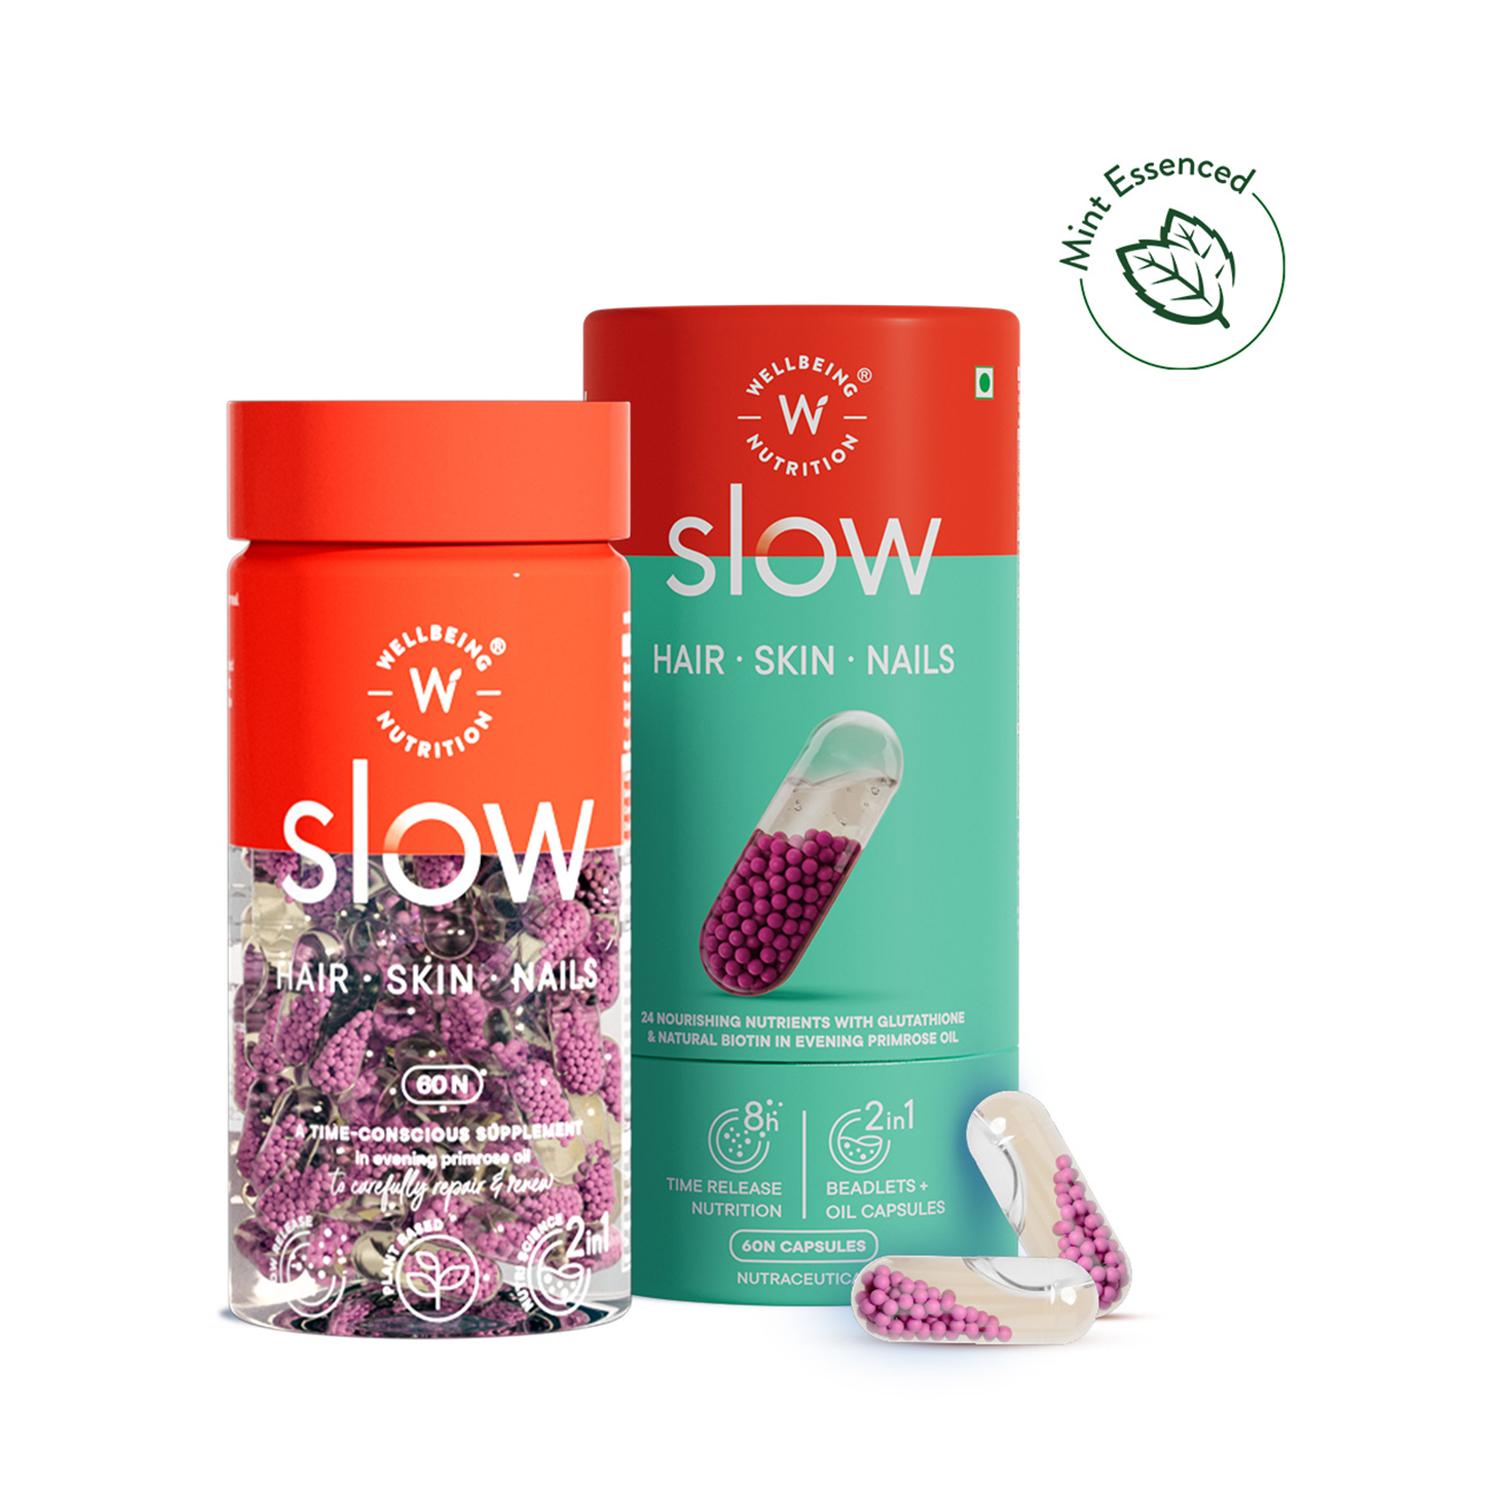 Wellbeing Nutrition | Wellbeing Nutrition Slow Hair, Skin & Nails with Collagen,HLA, for Skin Glow, Hair Growth & Repair